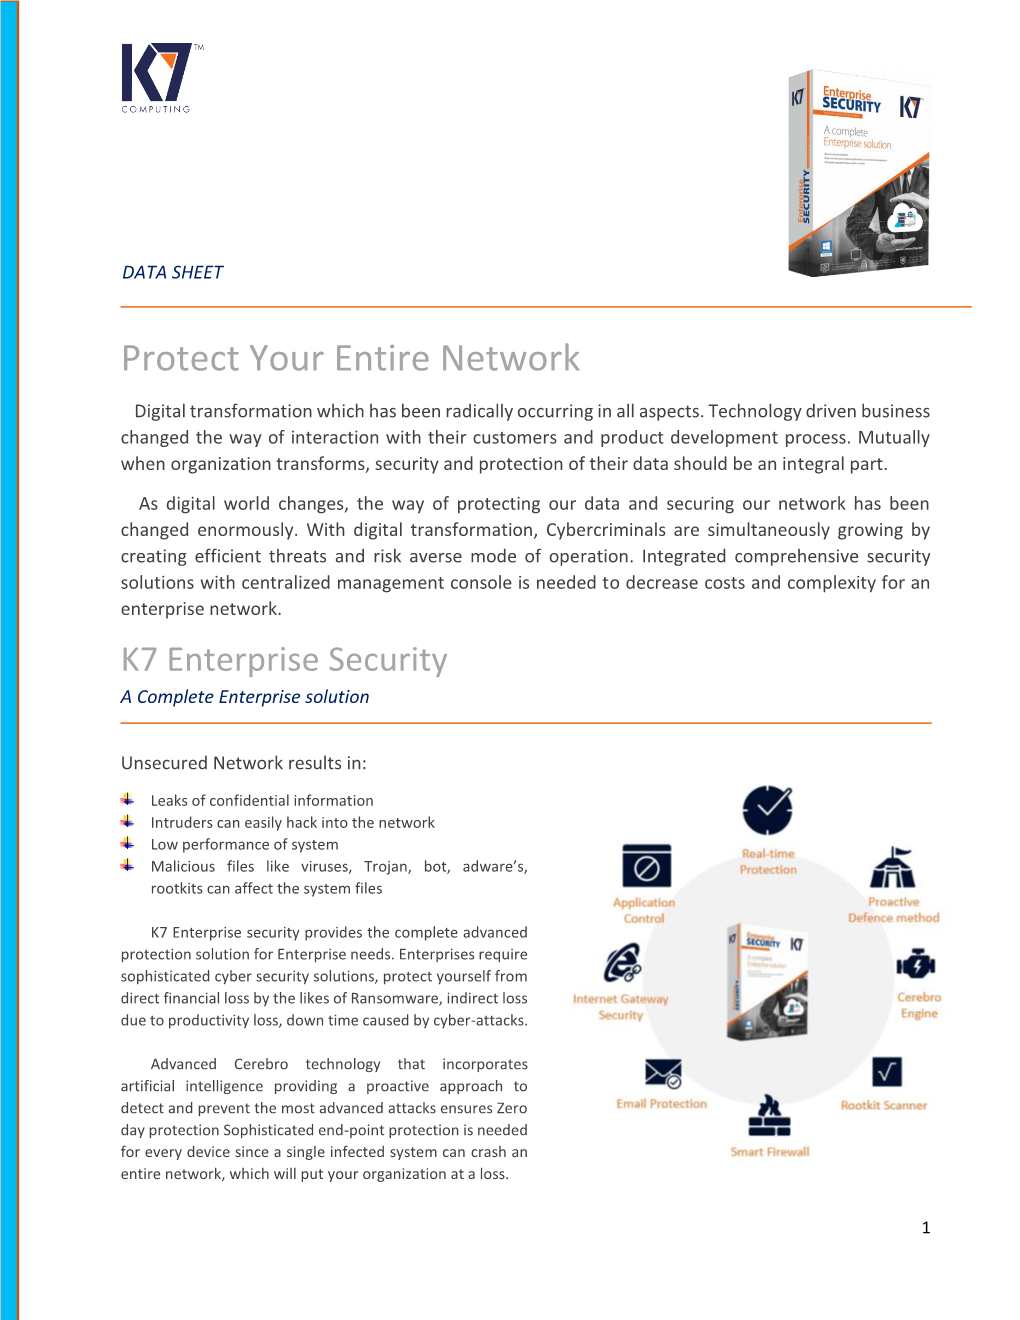 Protect Your Entire Network